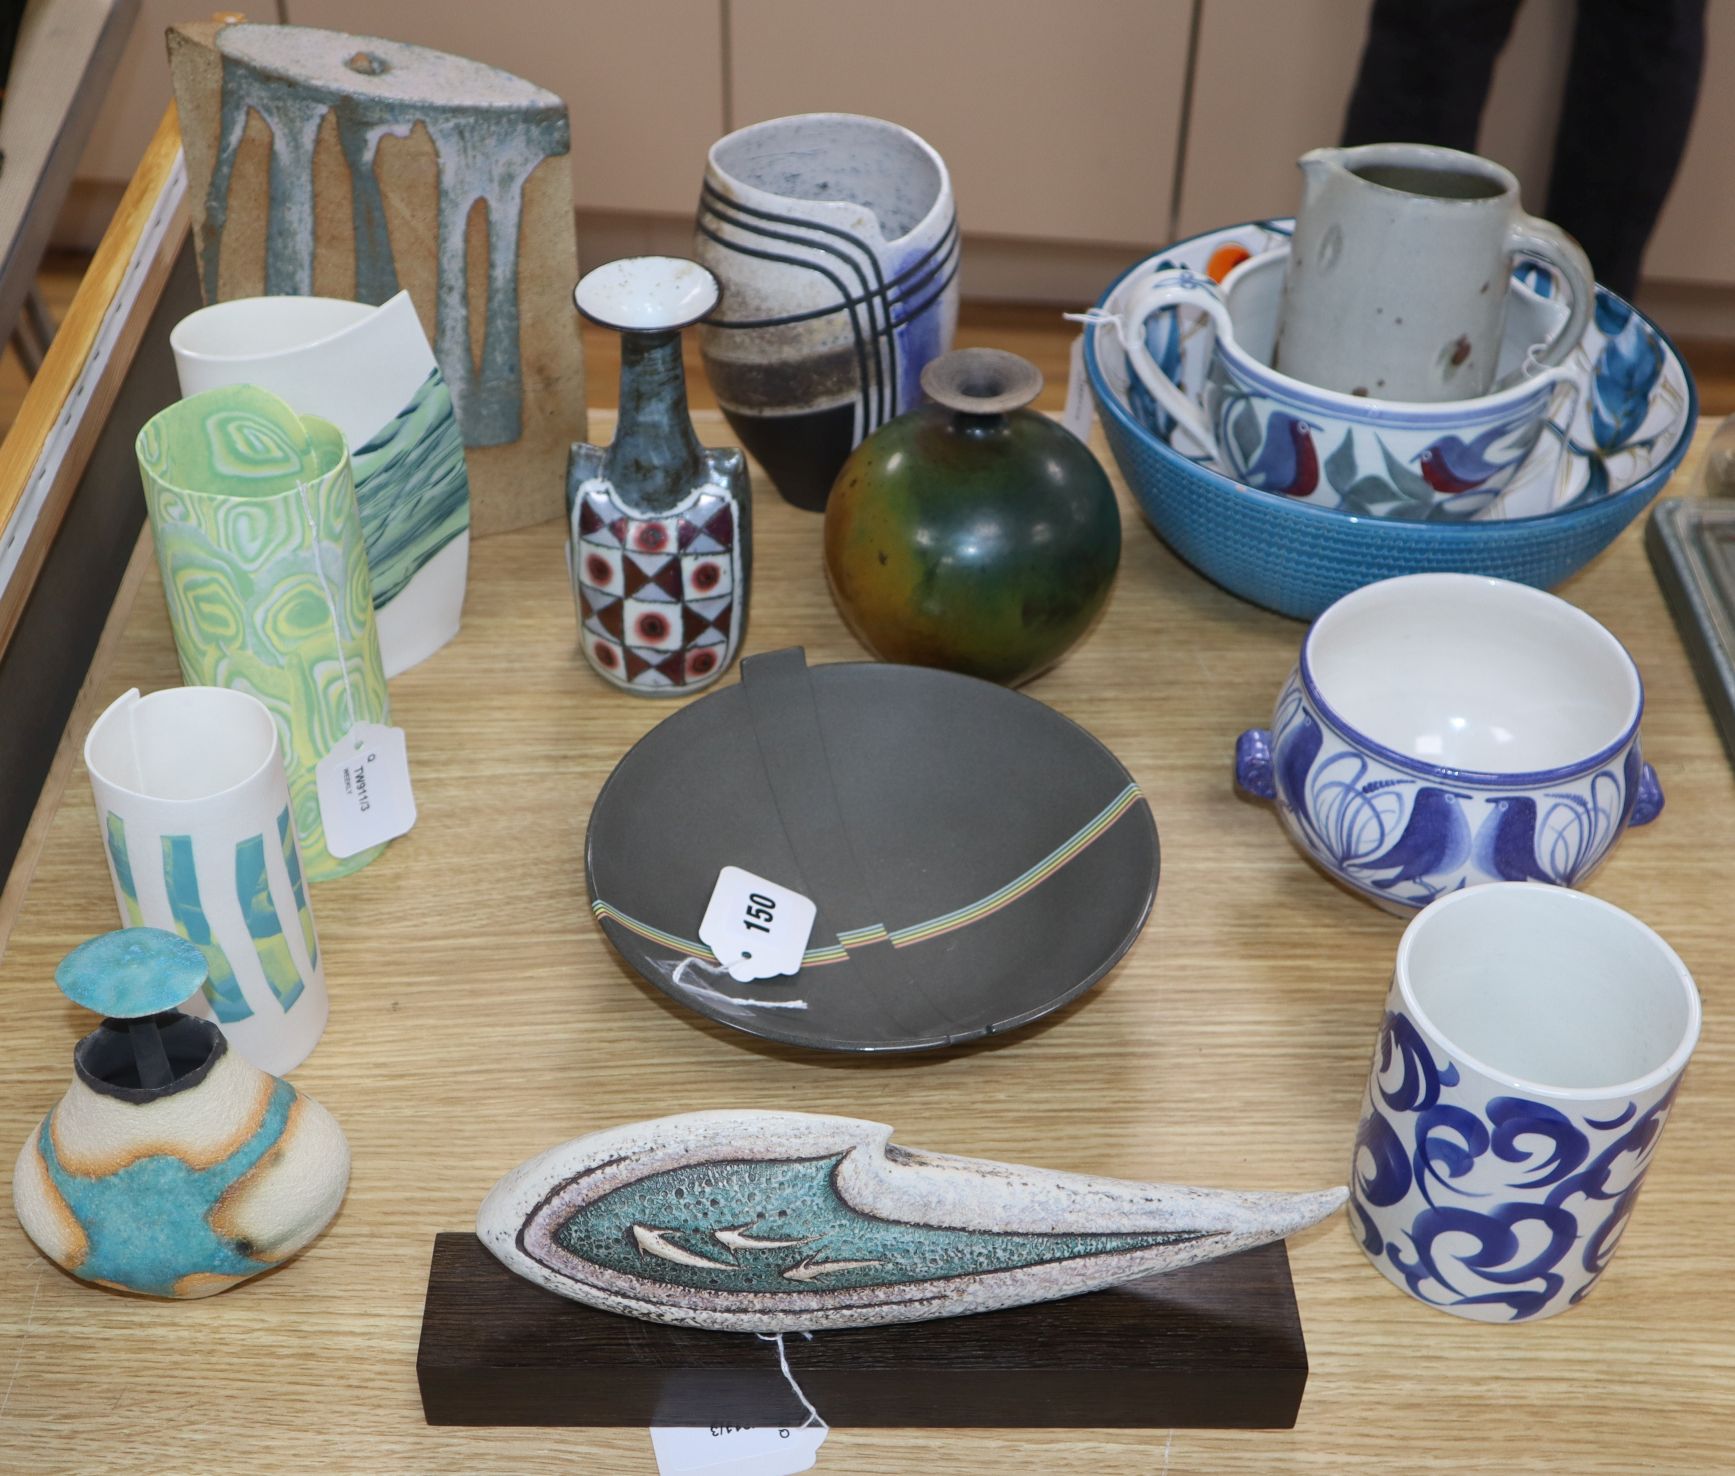 A collection of decorative studio and other pottery and porcelain, including a vase by Marianne de